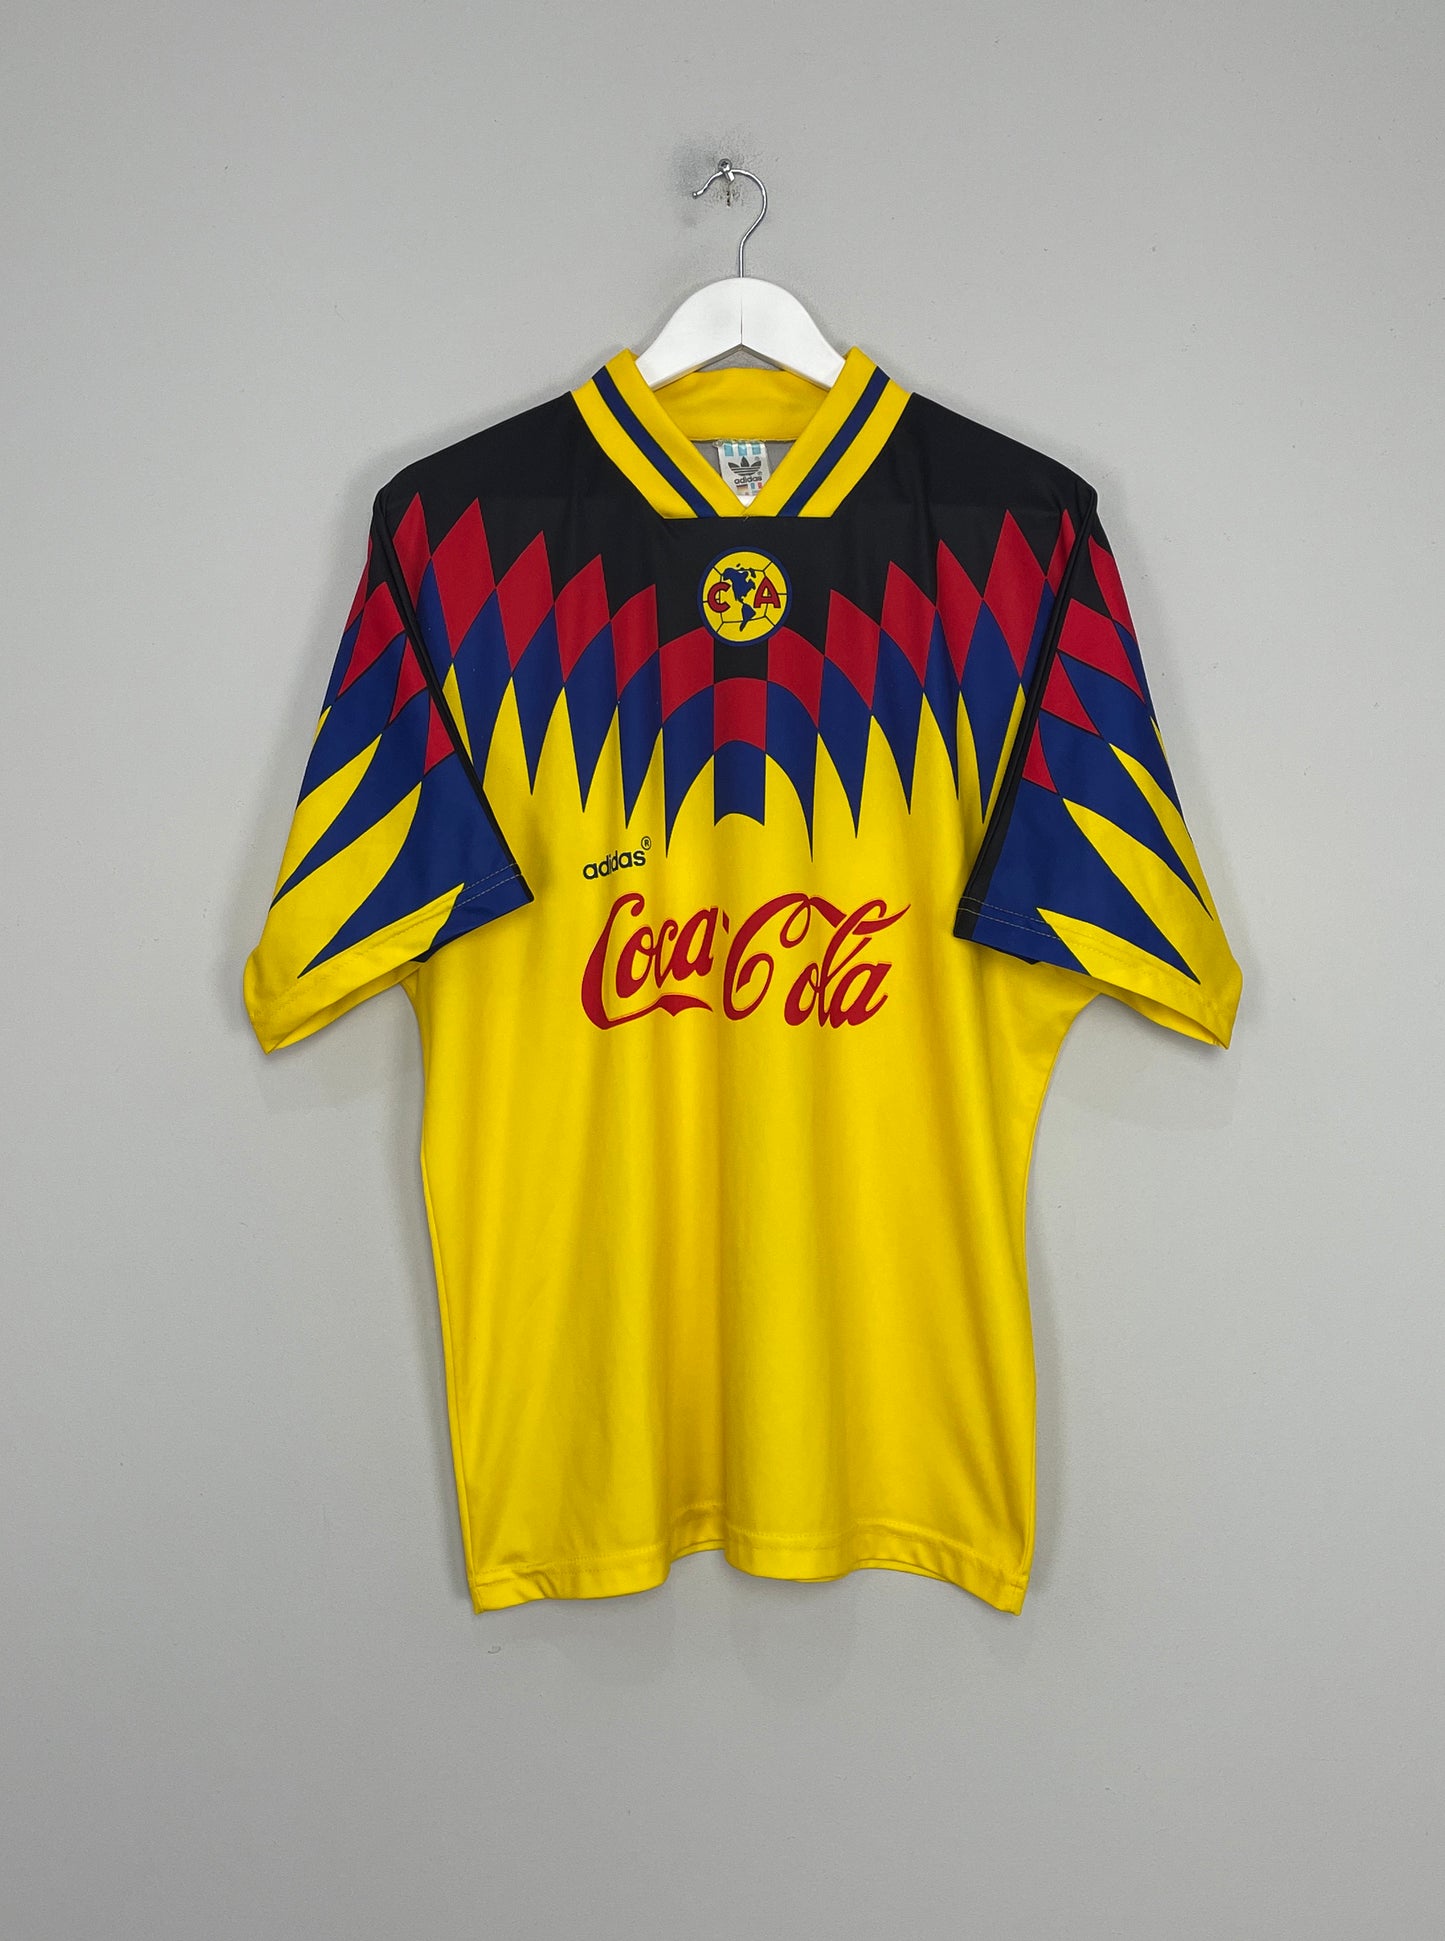 Image of the Club America shirt from the 1994/96 season